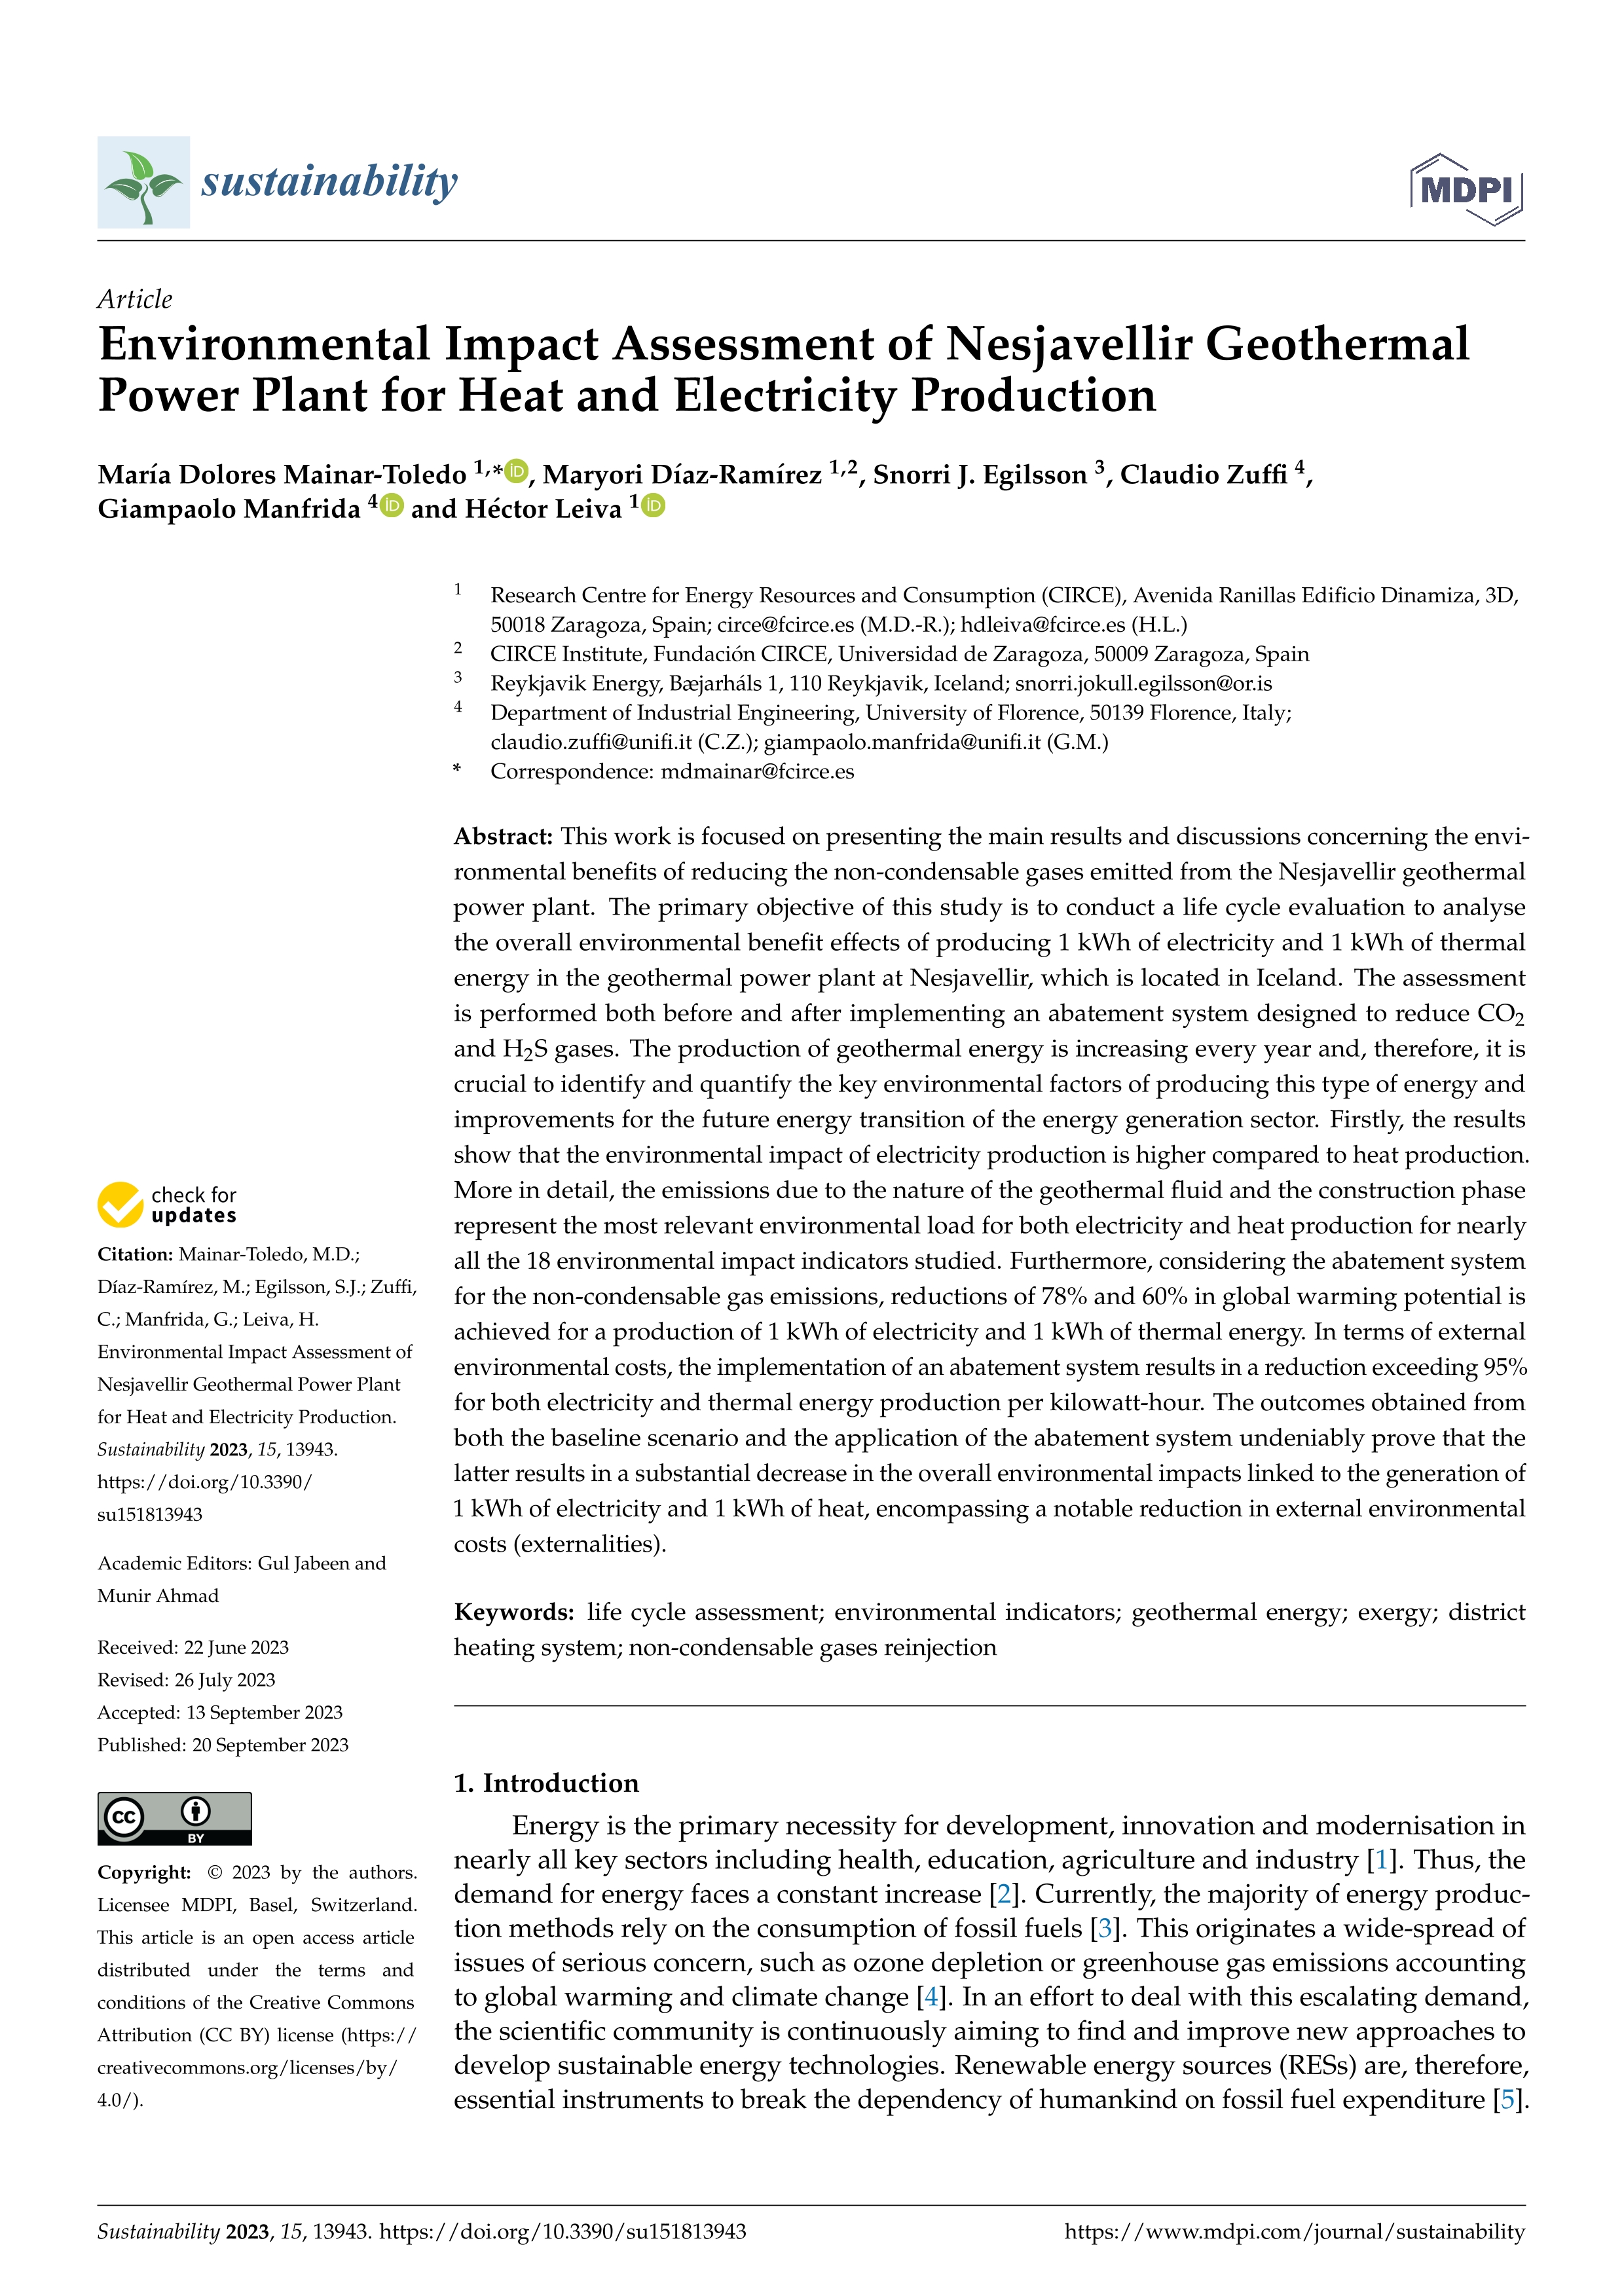 Environmental impact assessment of nesjavellir geothermal power plant for heat and electricity production